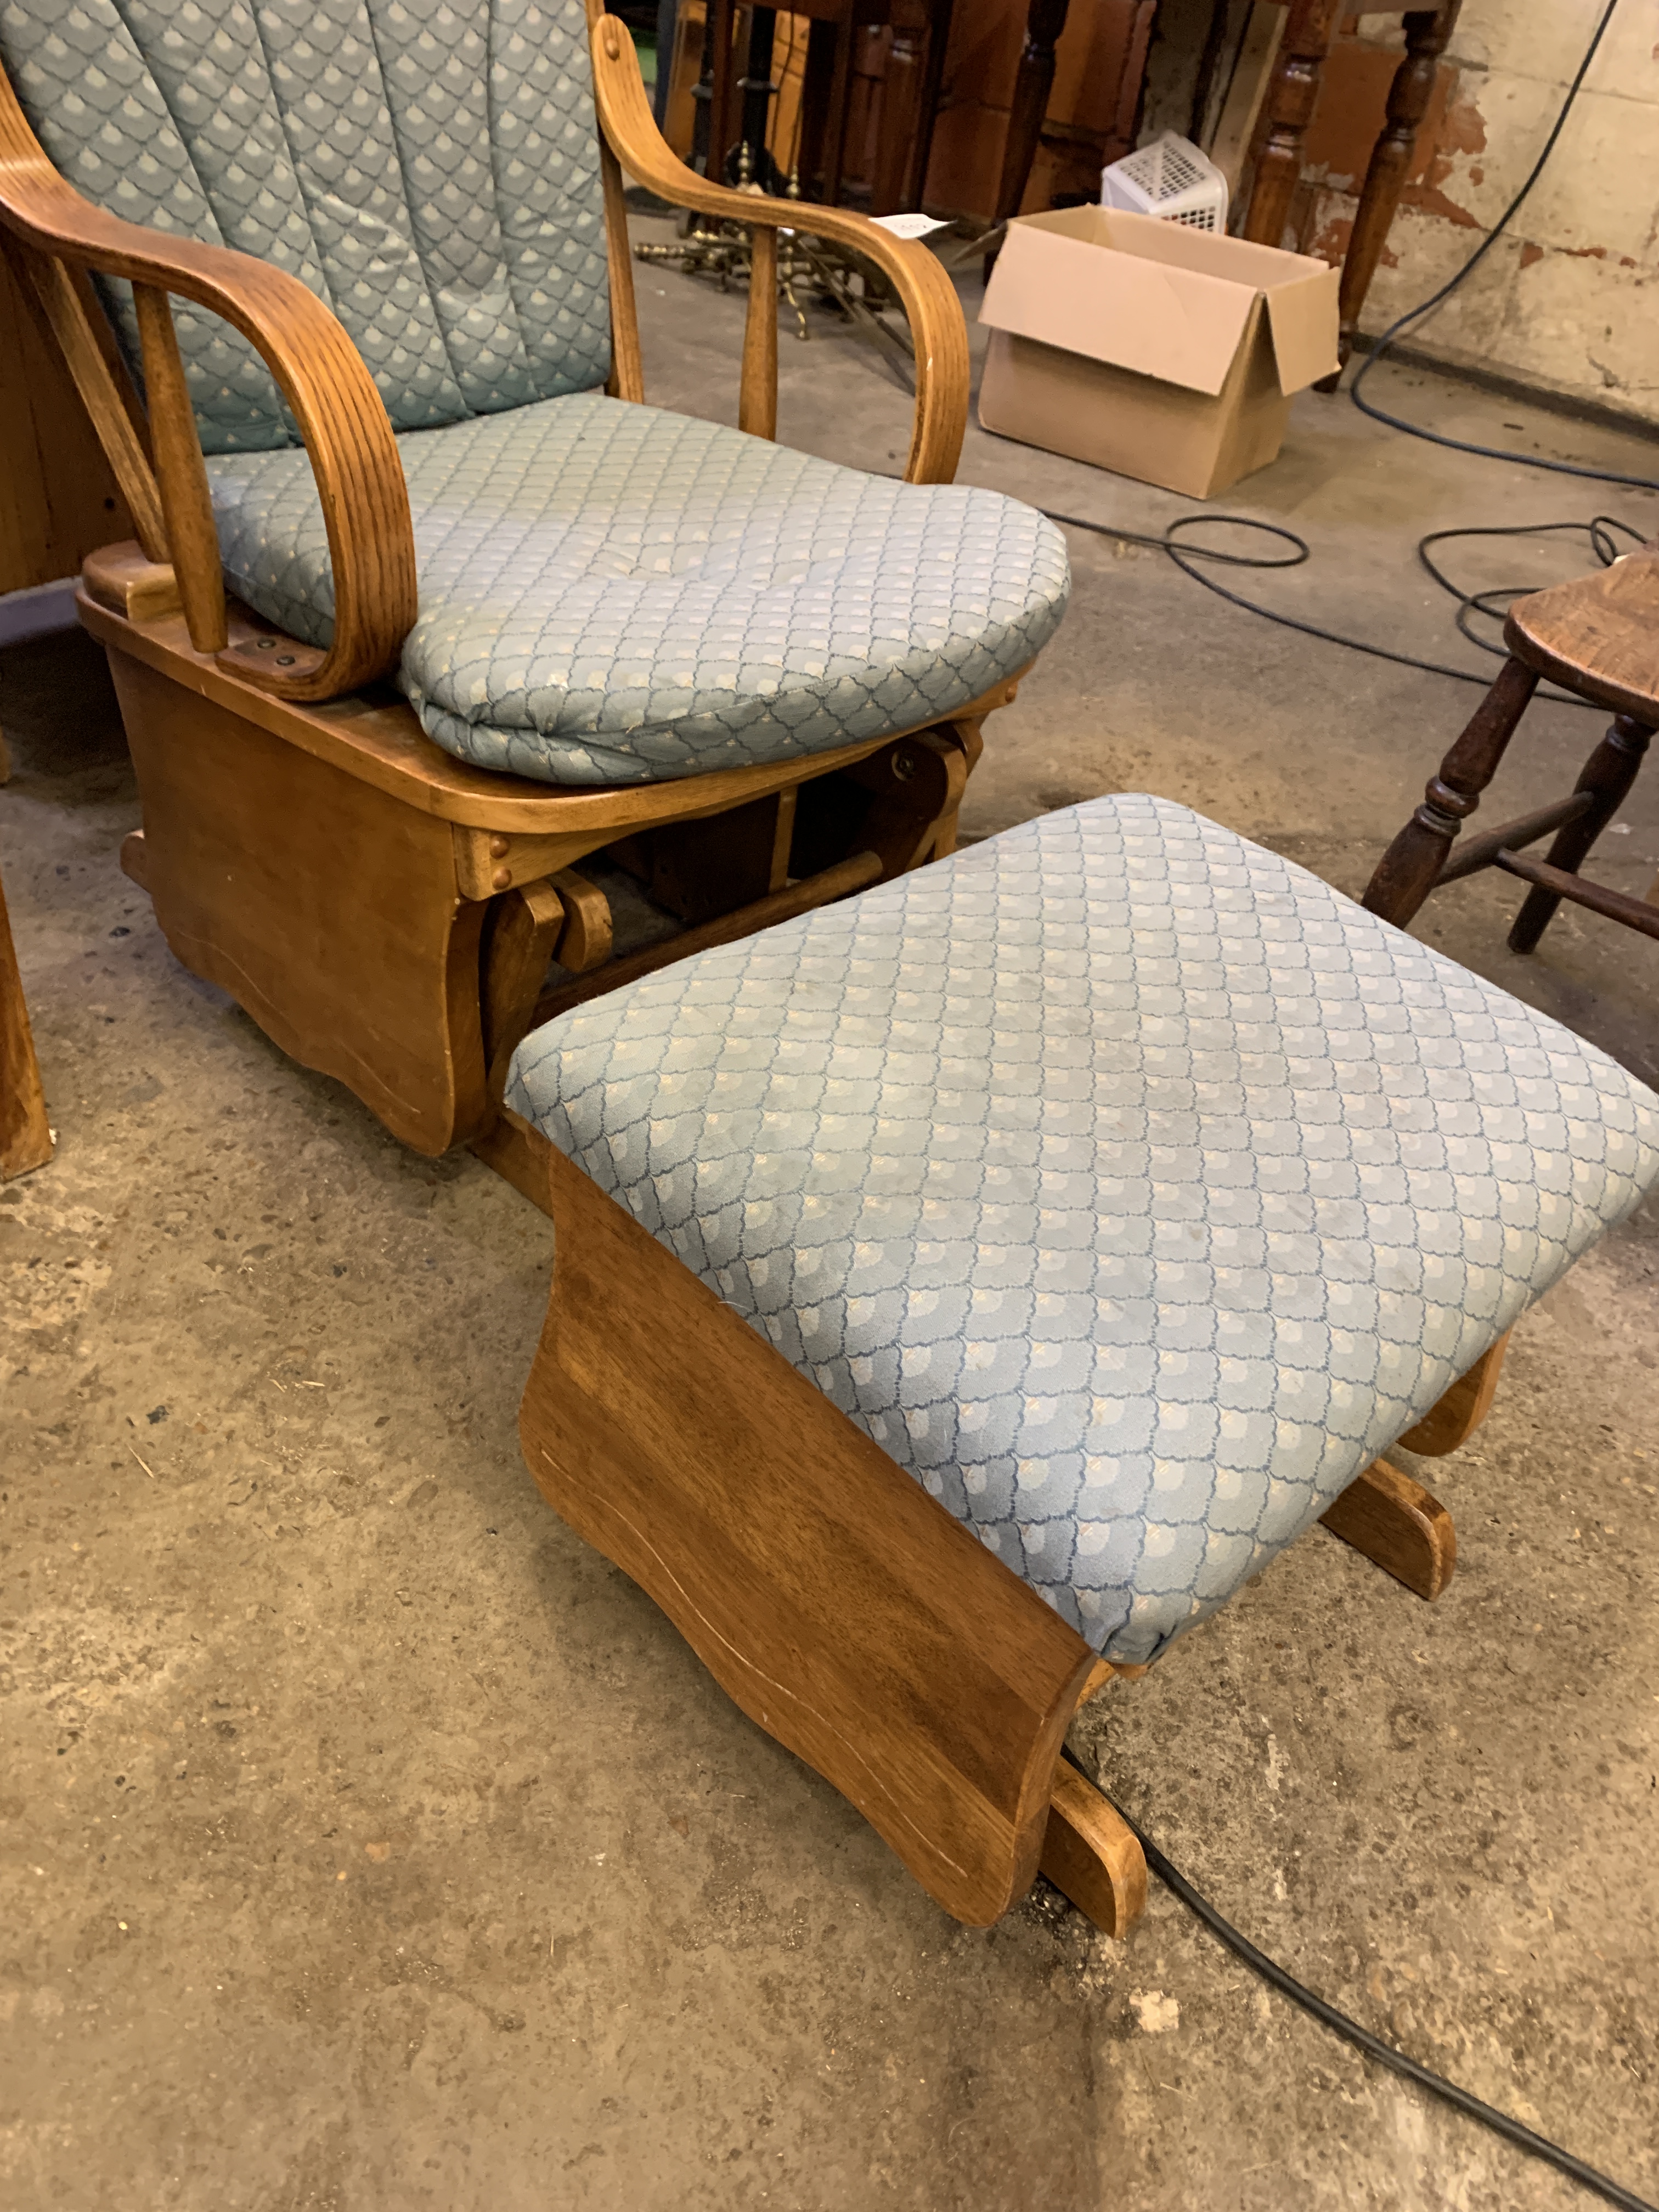 Bentwood American-style rocking chair and footstool - Image 2 of 4